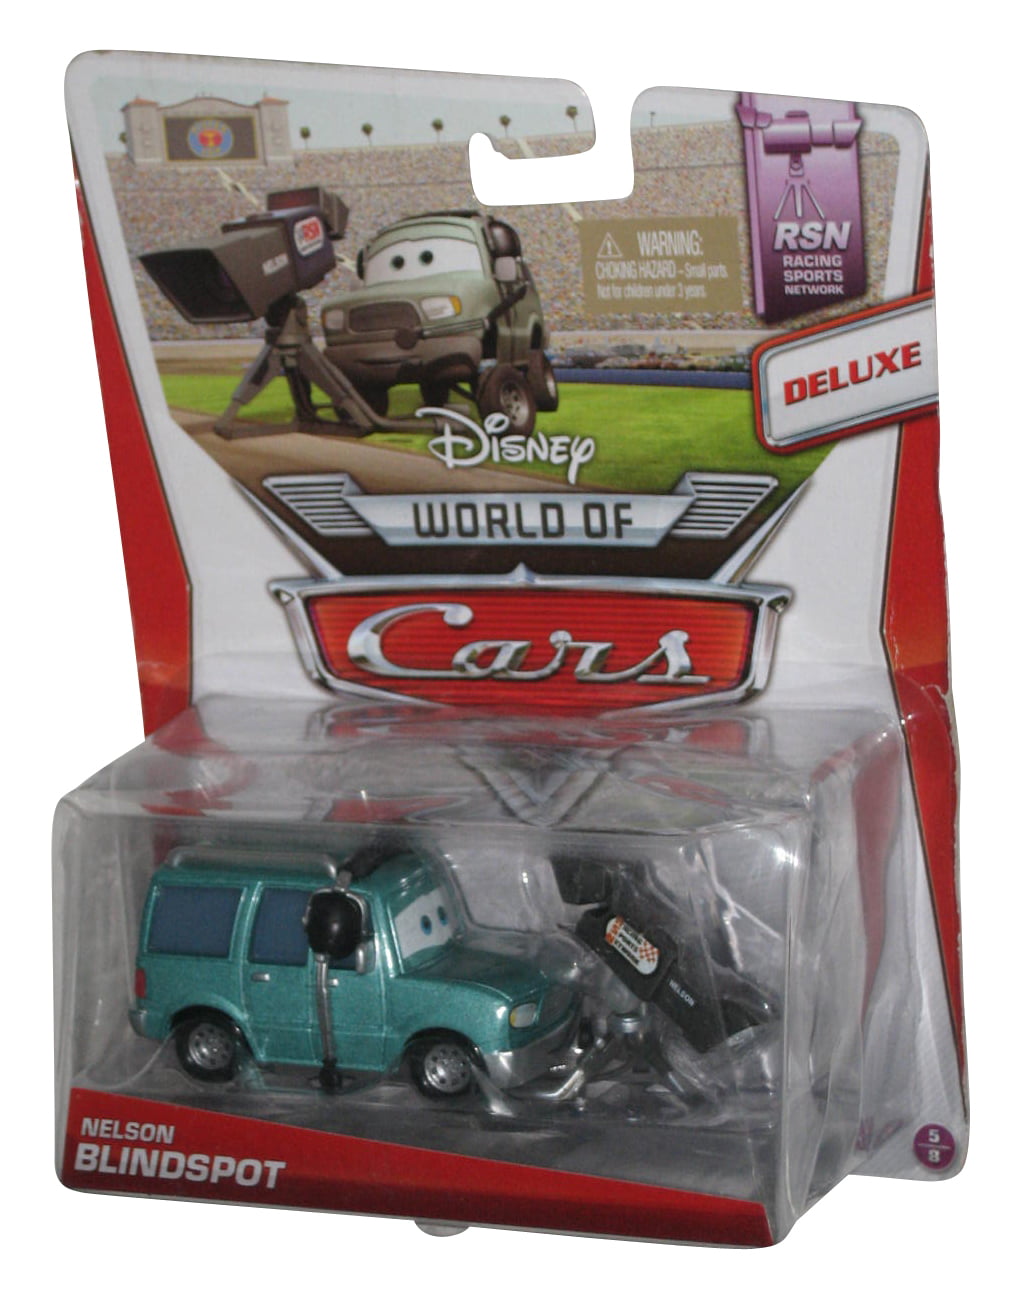 DISNEY CARS DIECAST Deluxe" Combined Postage "Nelson Blindspot 